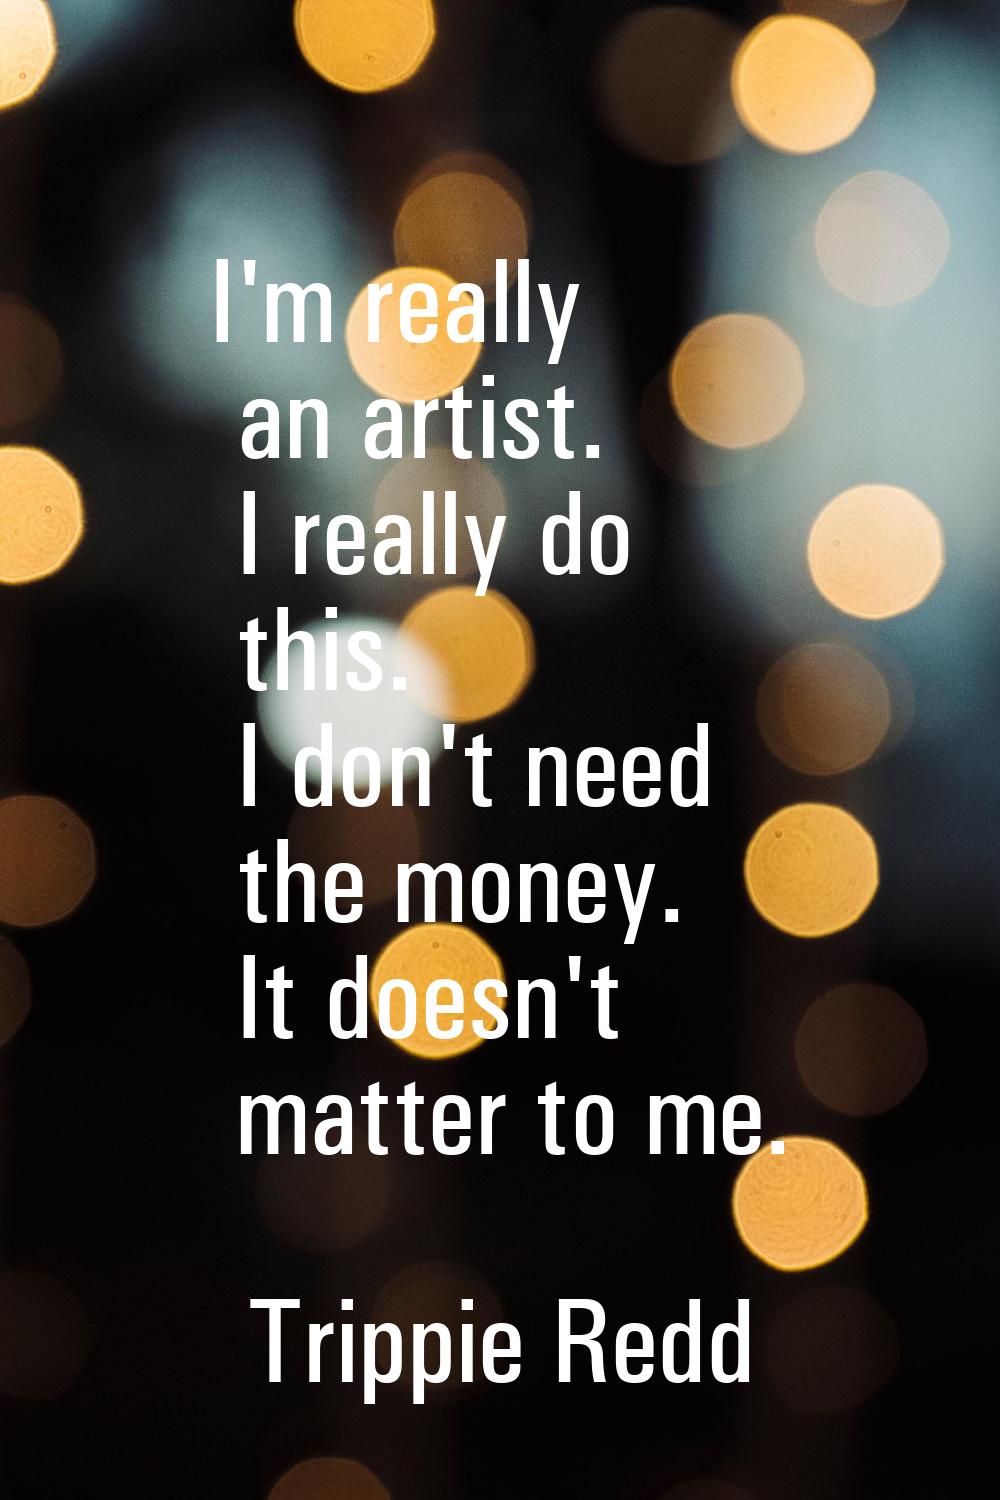 I'm really an artist. I really do this. I don't need the money. It doesn't matter to me.